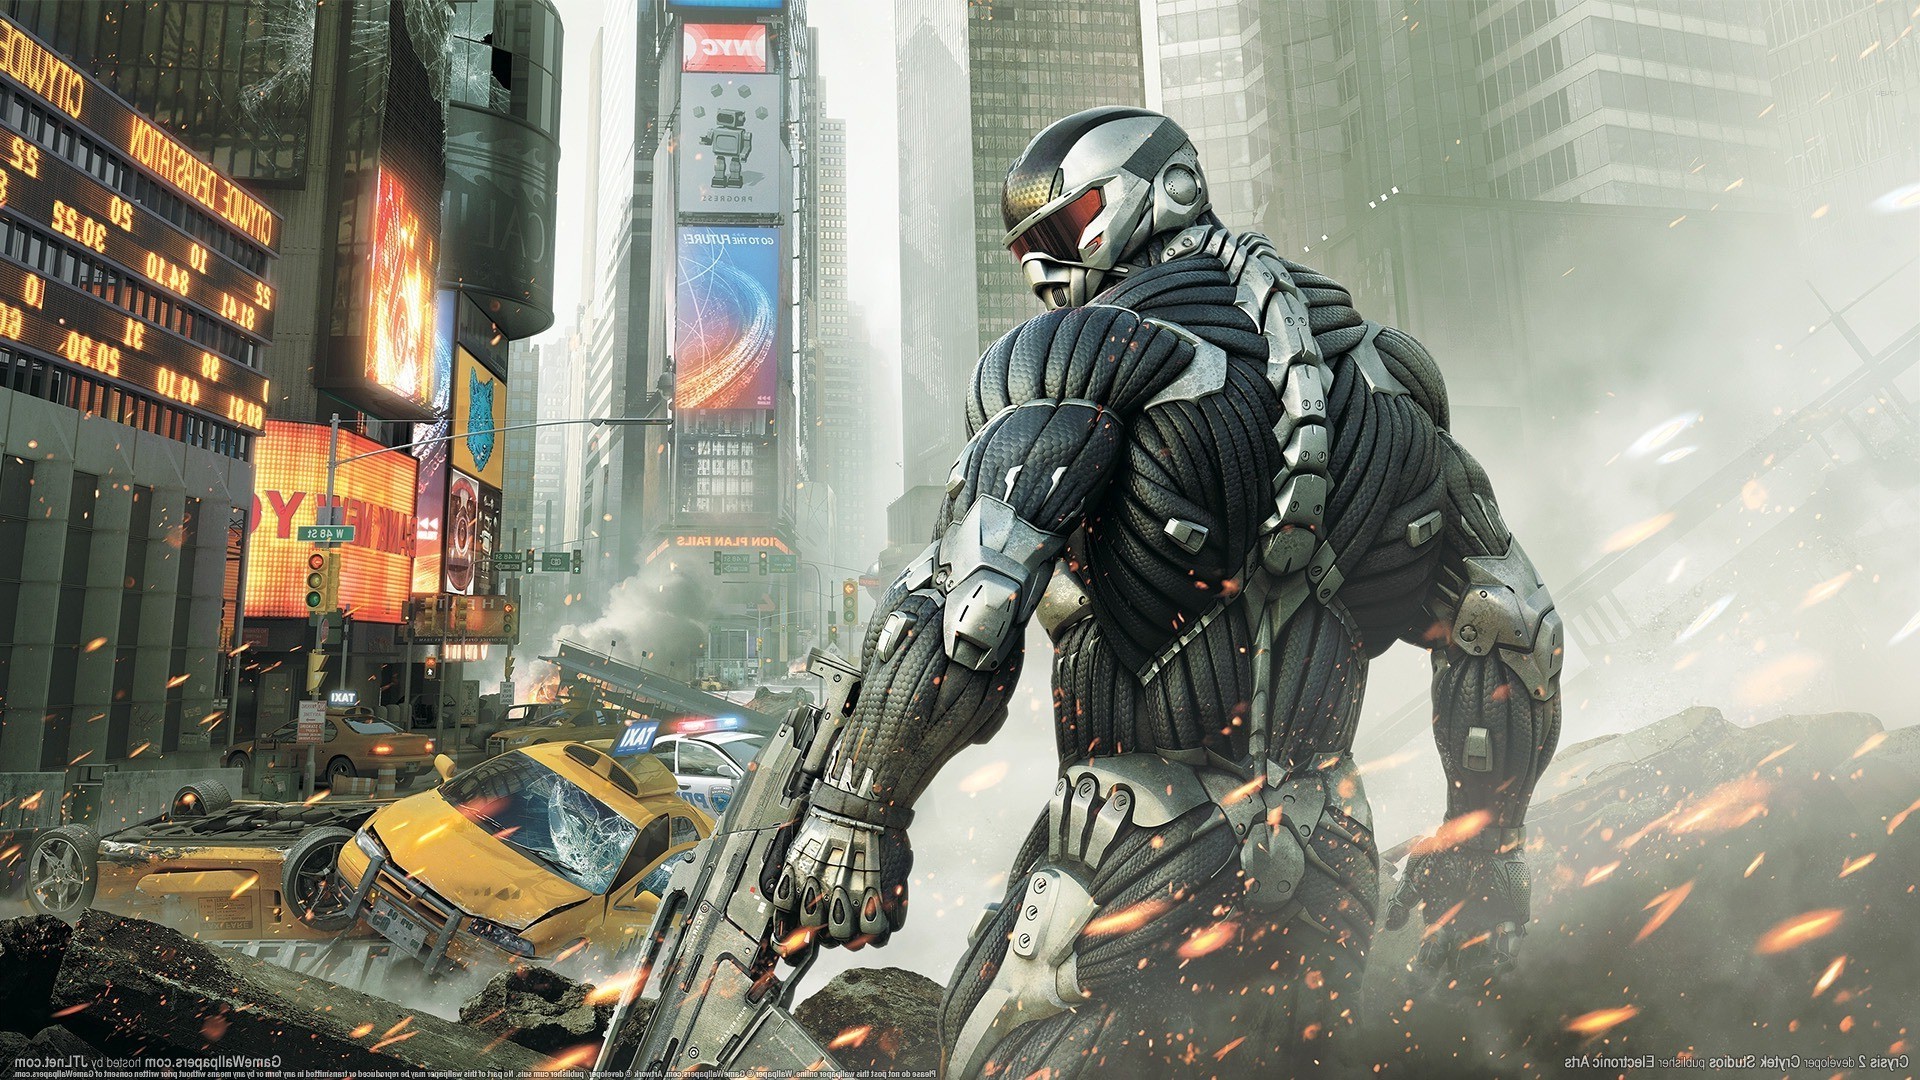 crysis 3 wallpaper,action adventure game,pc game,shooter game,games,fictional character